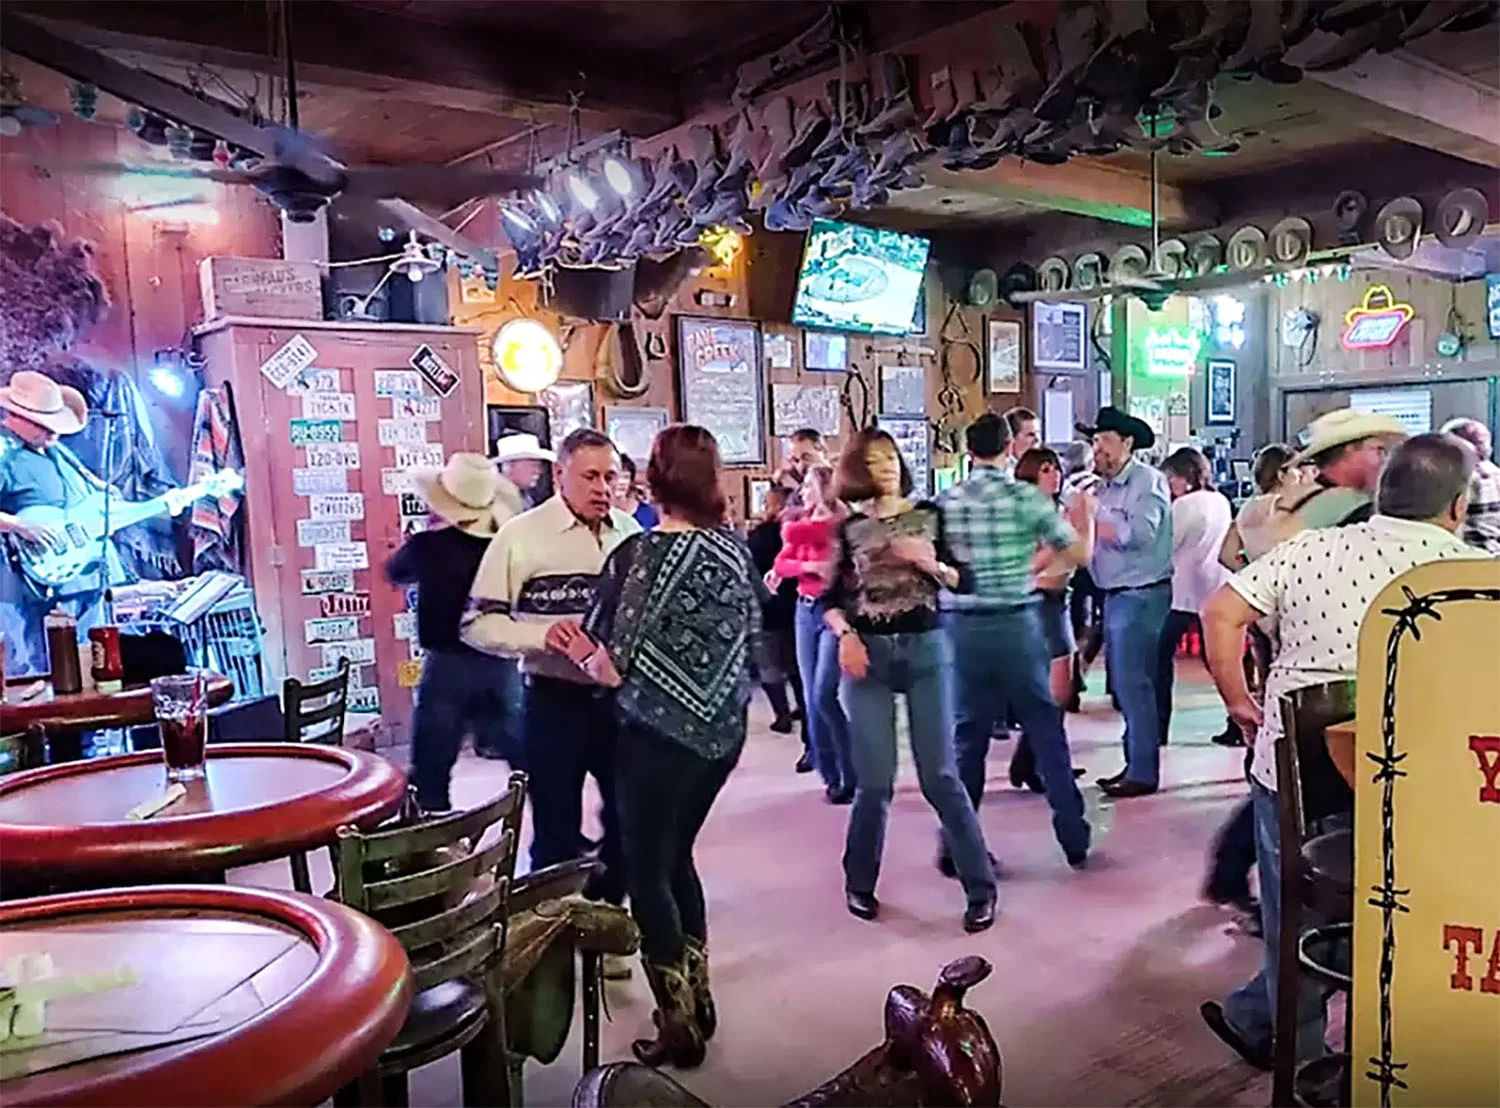 Country western dancing to live music at the Buffalo Chip Saloon in old town Cave Creek